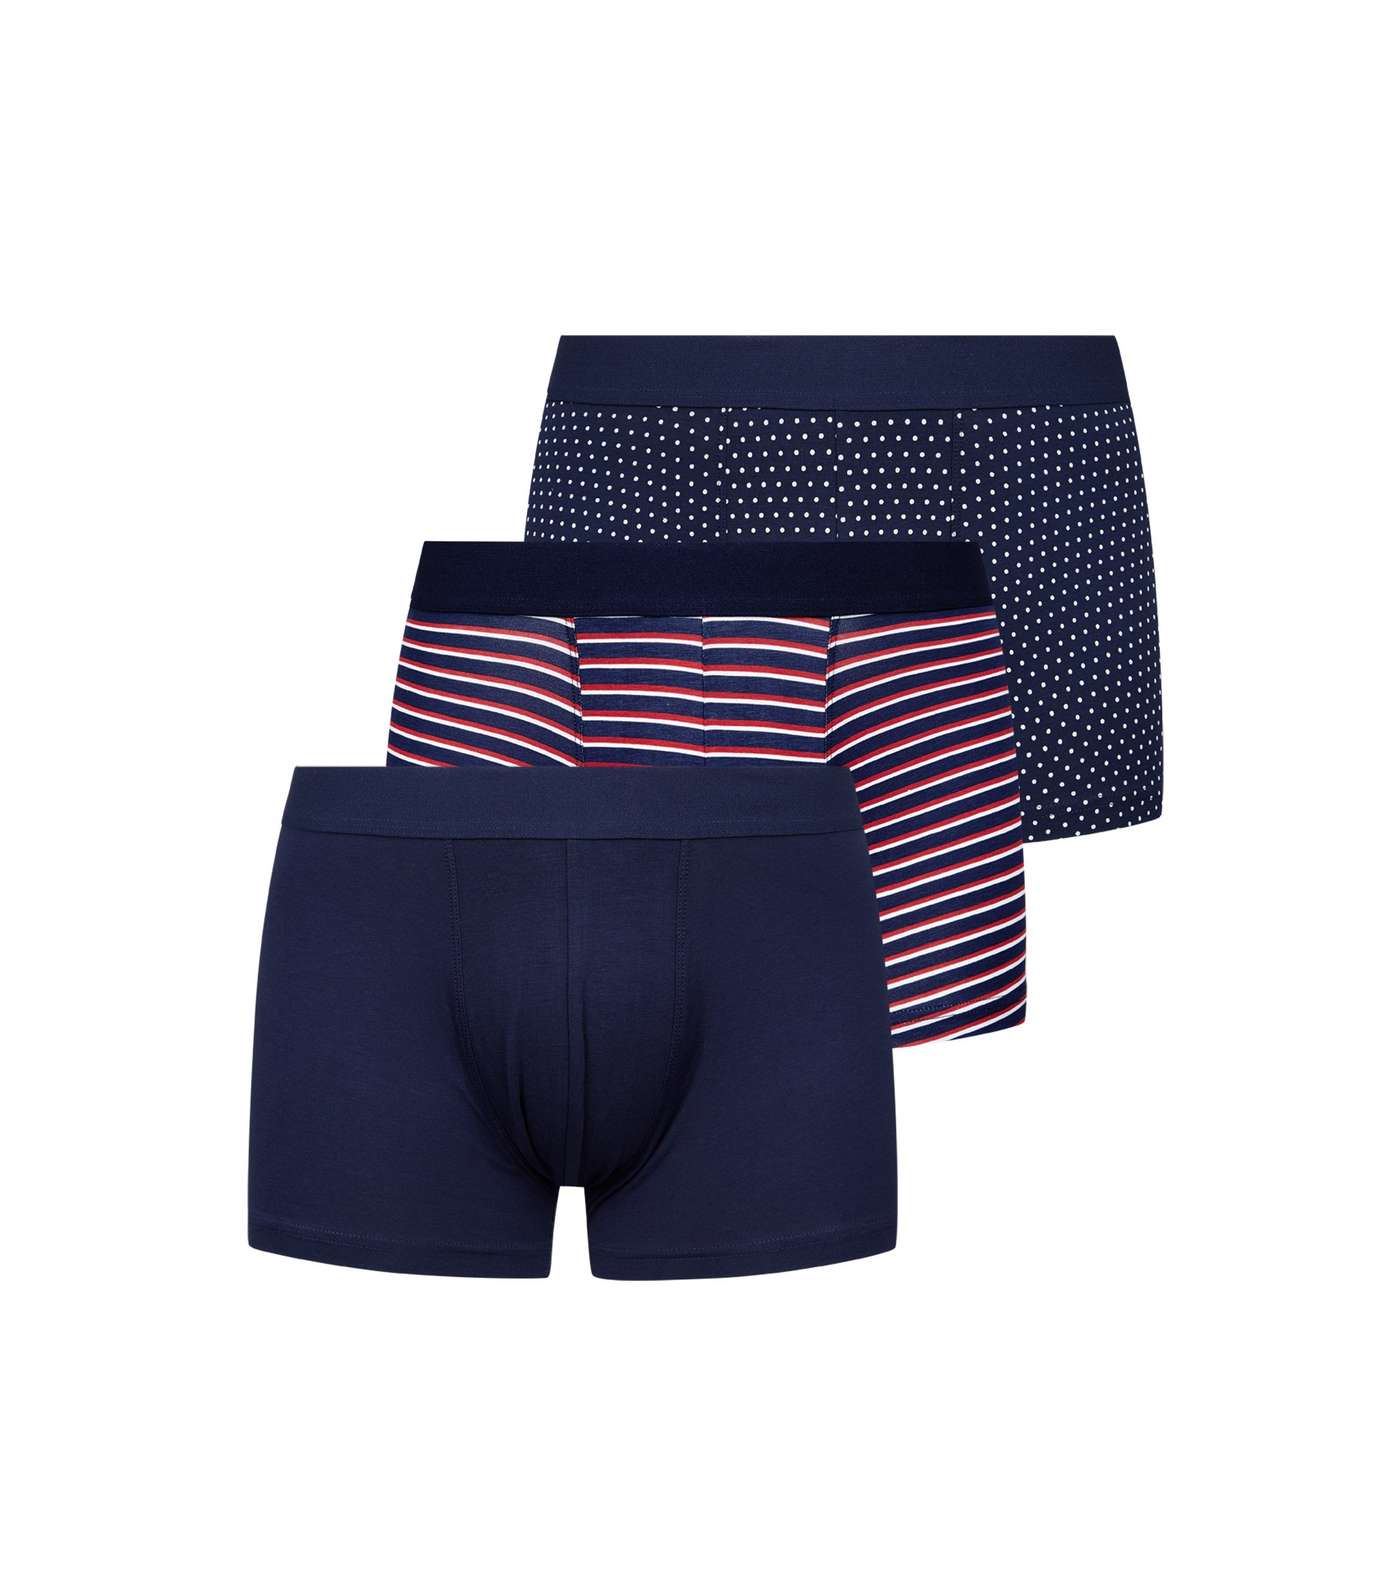 3 Pack Navy Spot and Stripe Print Trunks Image 2